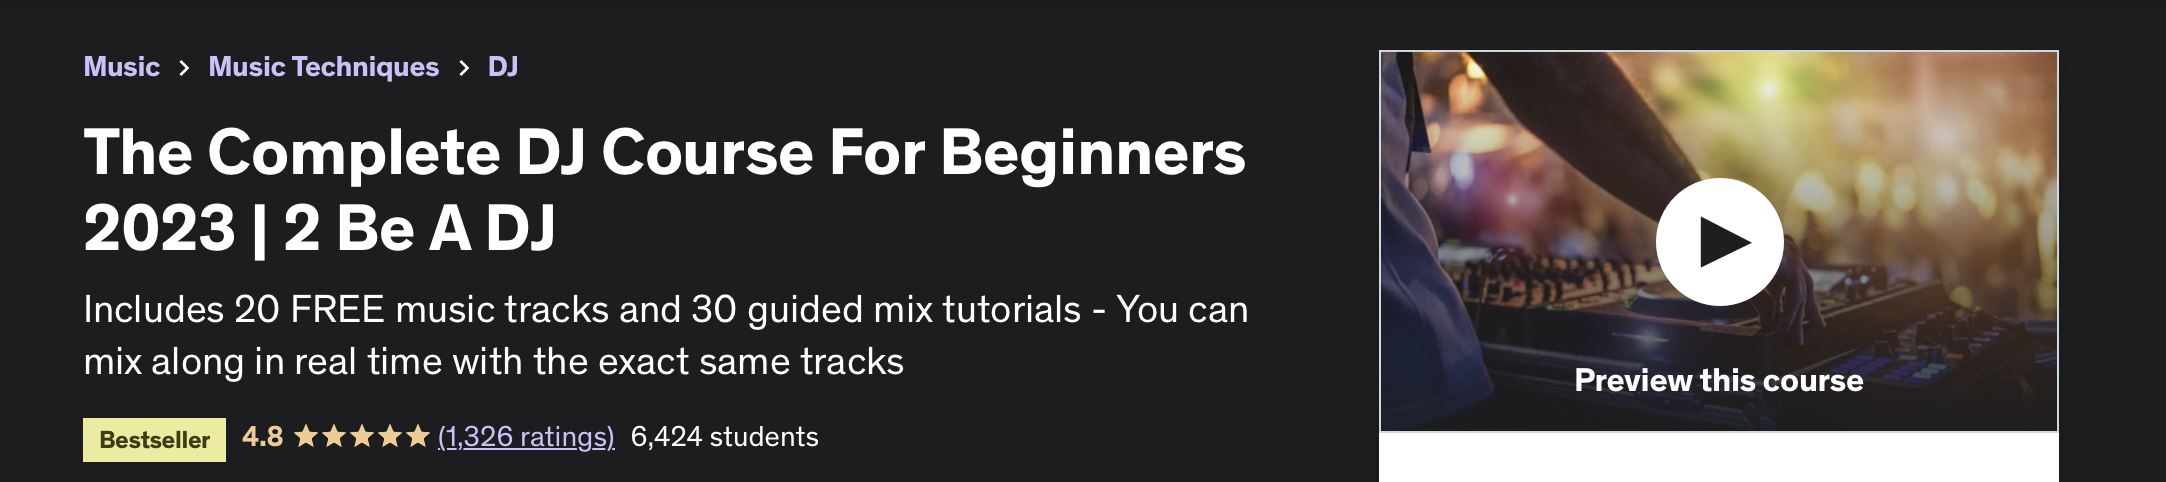 The Complete DJ Course For Beginners 2023 | 2 Be A DJ